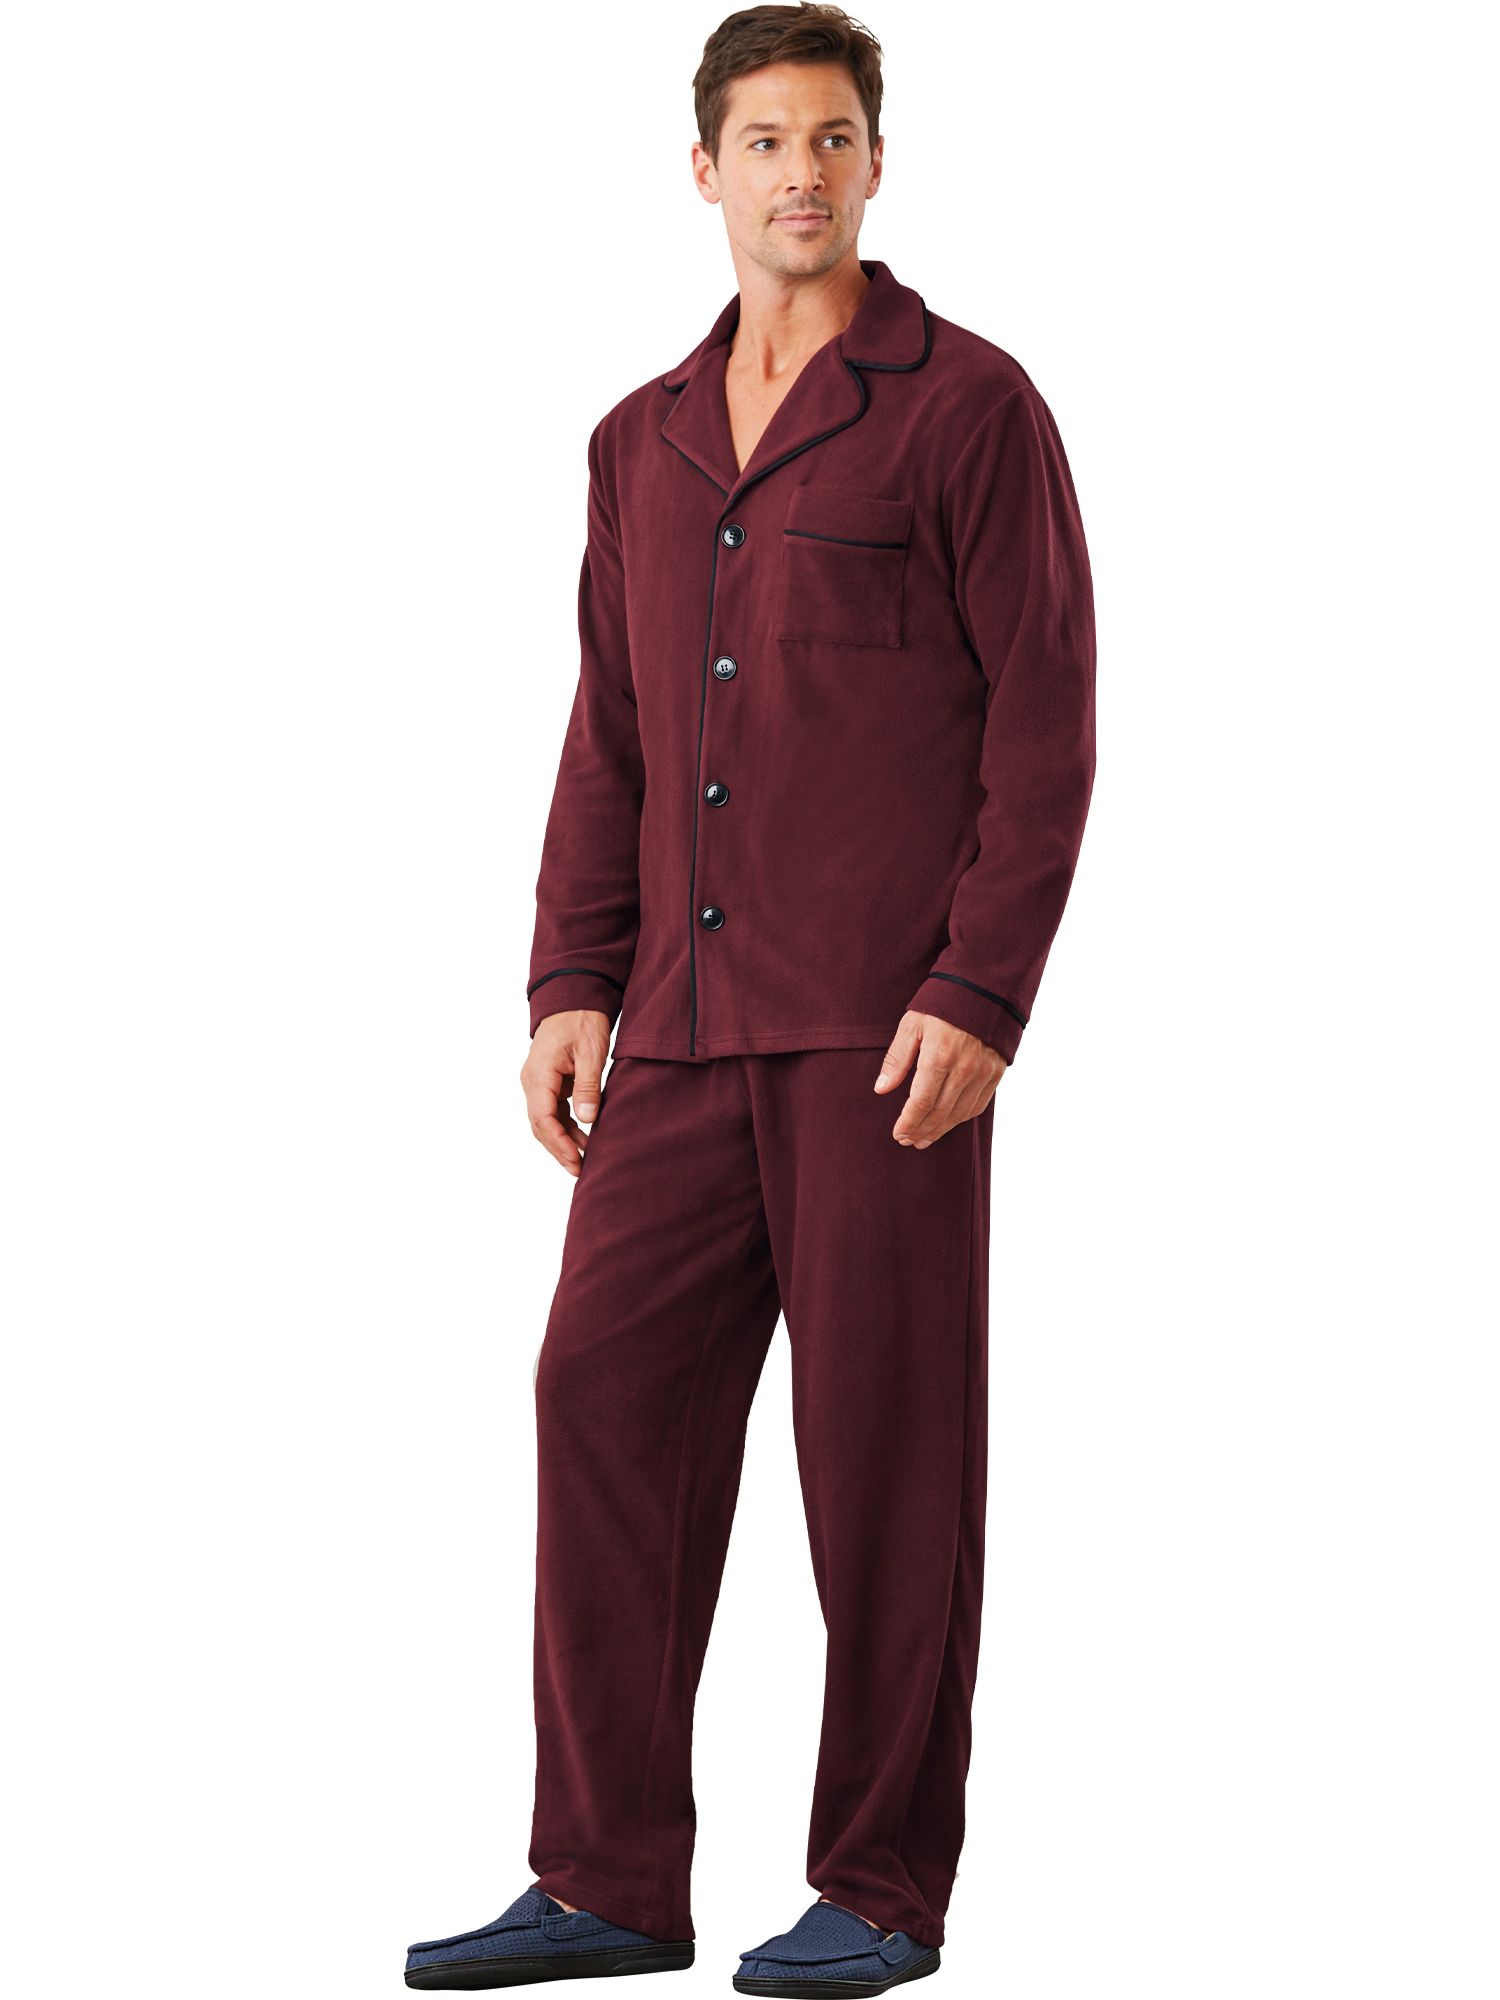 Different Touch Men's Pajama Lounge Pants Bottoms Fleece Sleepwear PJs with Pockets 